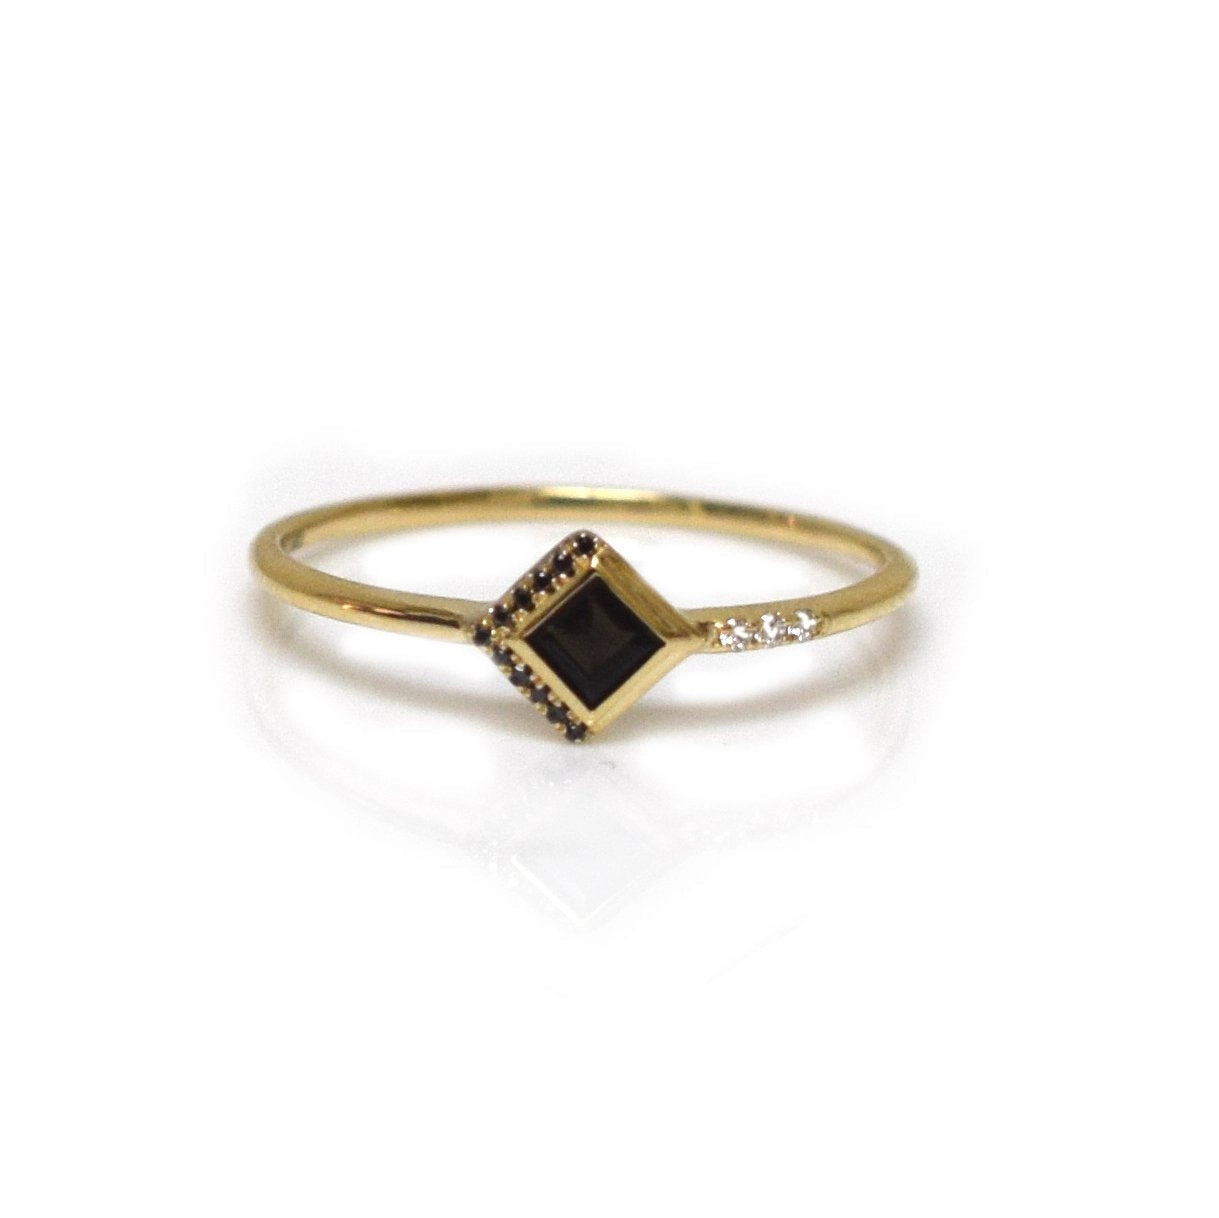 10K GOLD MYSTERIEUX RING